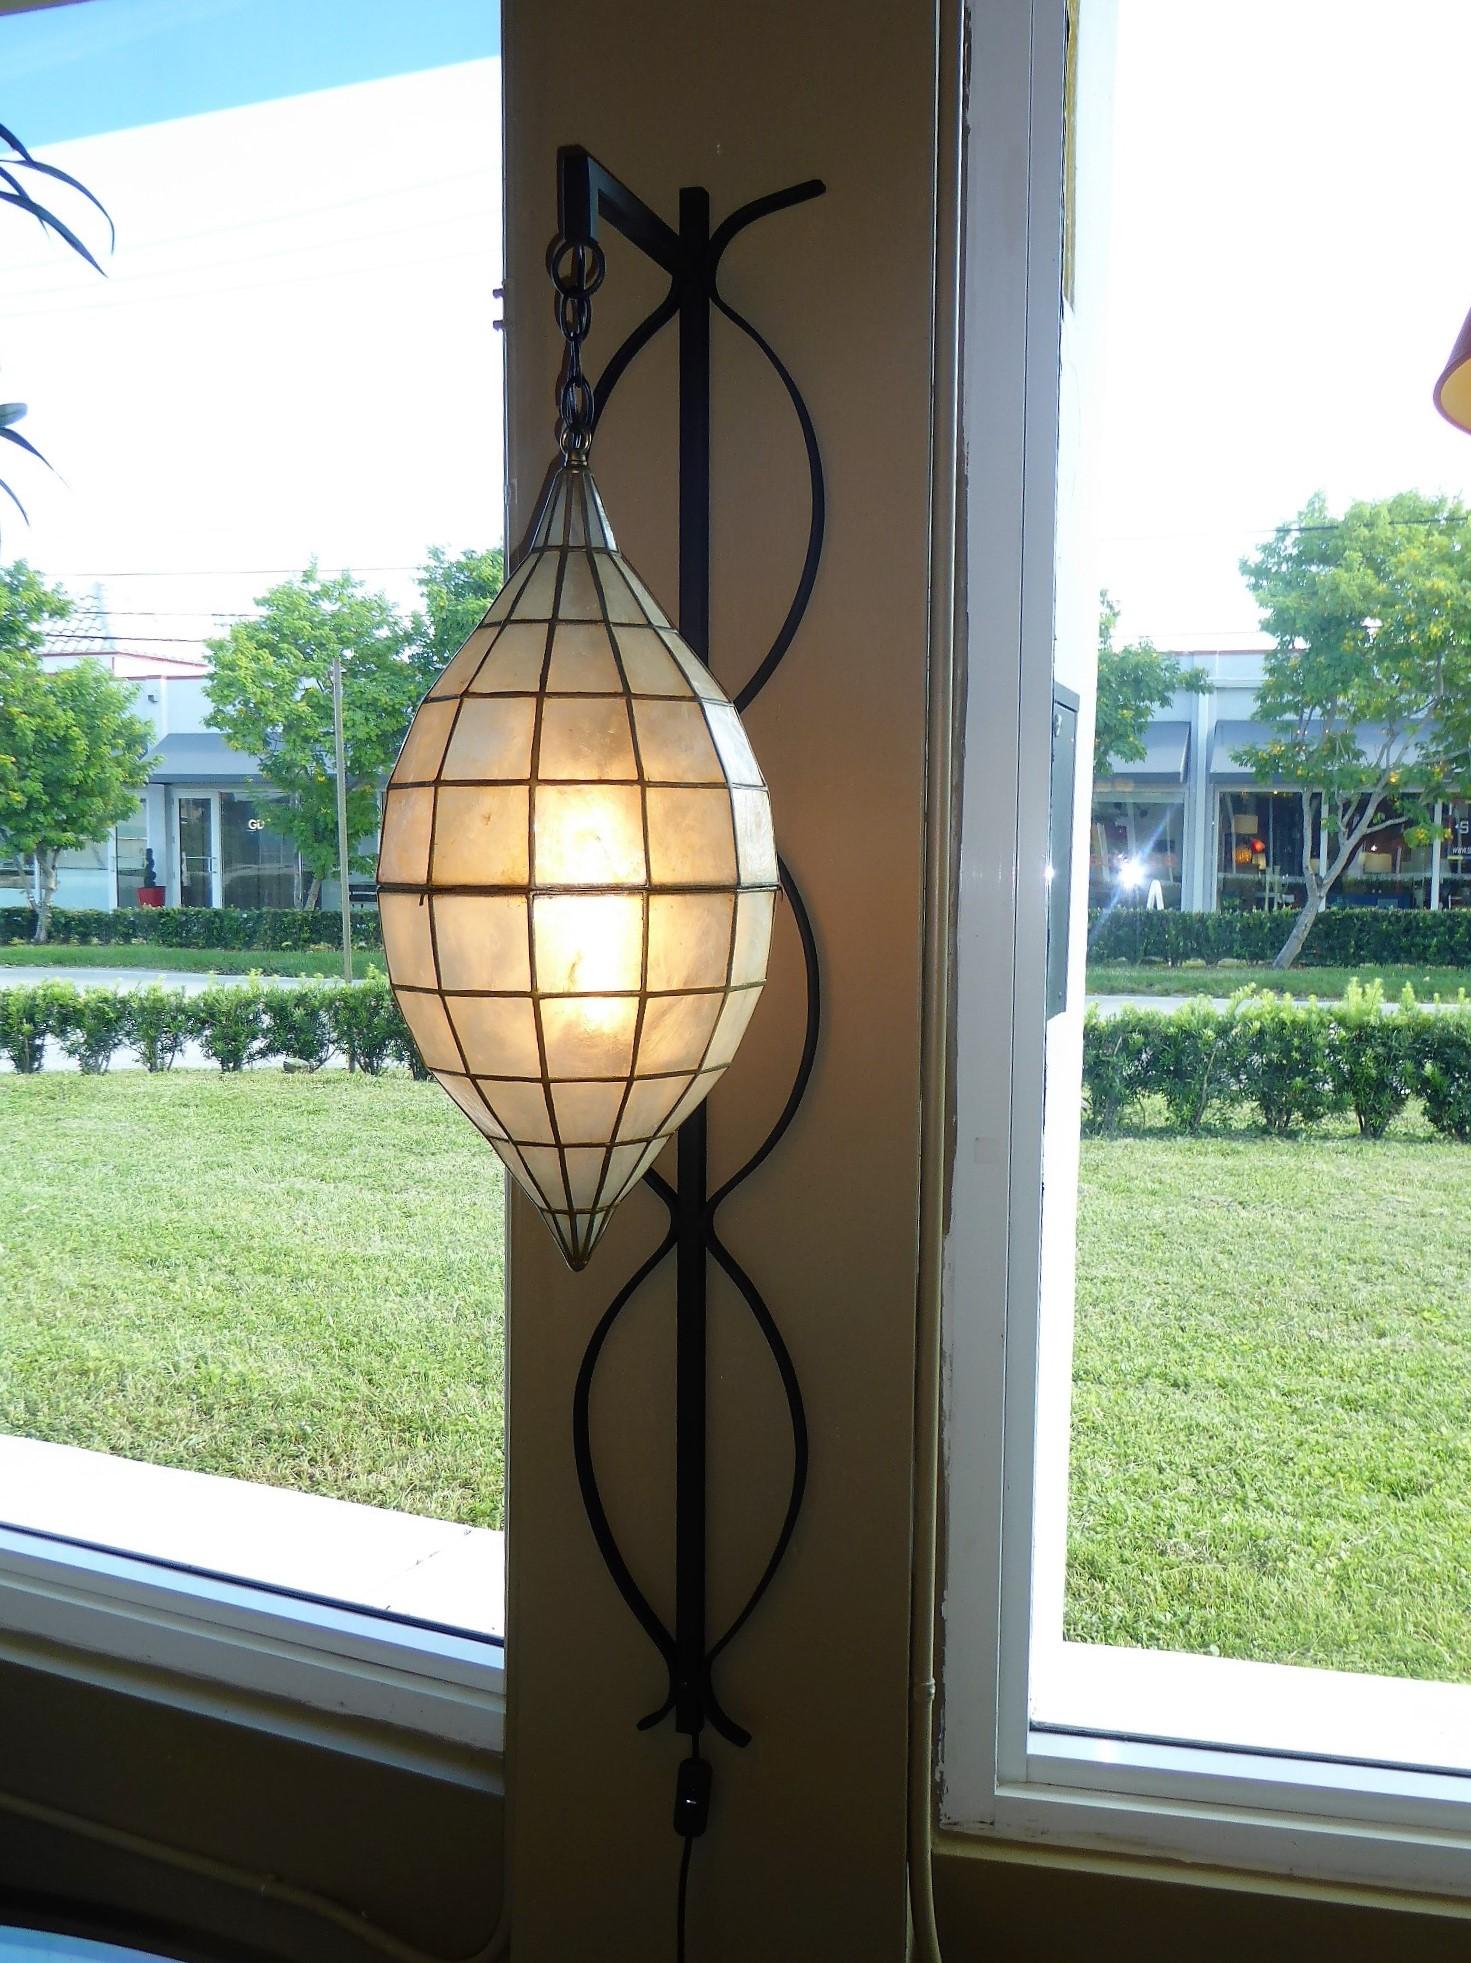 Unique and stunning, with a nod to Tony Duquette style, this wall sconce or light has a large Oblique Spheroid or teardrop form Capiz Shell pendant light hanging from a shaped wrought iron back, wall mounted. Completely restored, the wrought iron